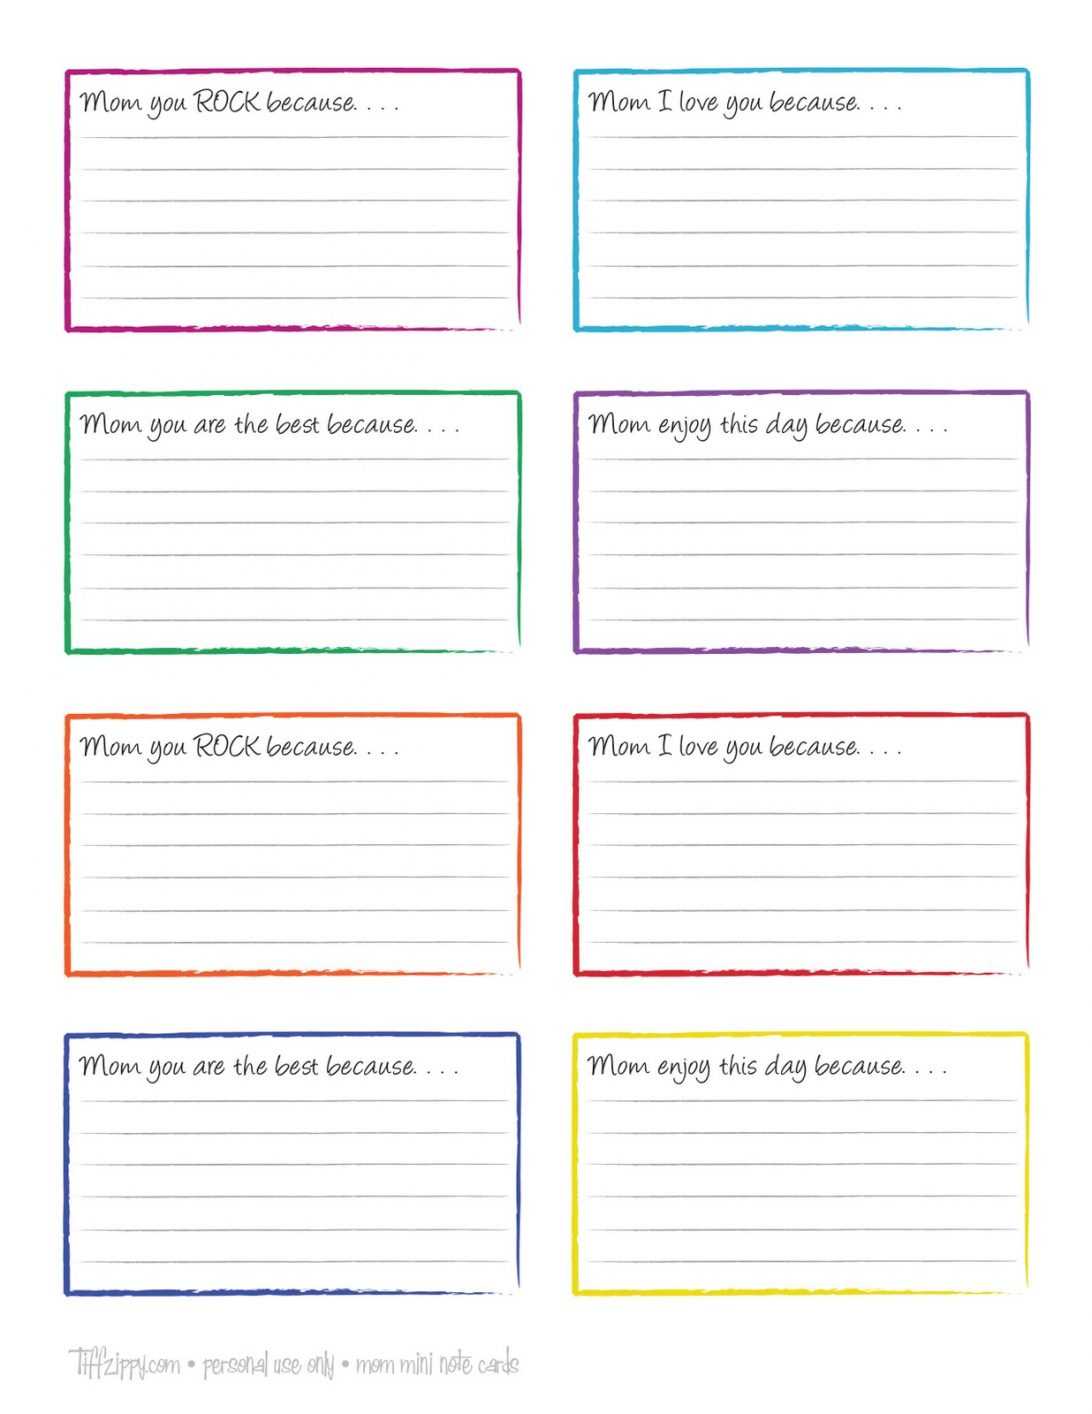 Index Card Template Free Recipe 3X5 For Mac 4X6 Pages Blank Regarding Open Office Index Card Template